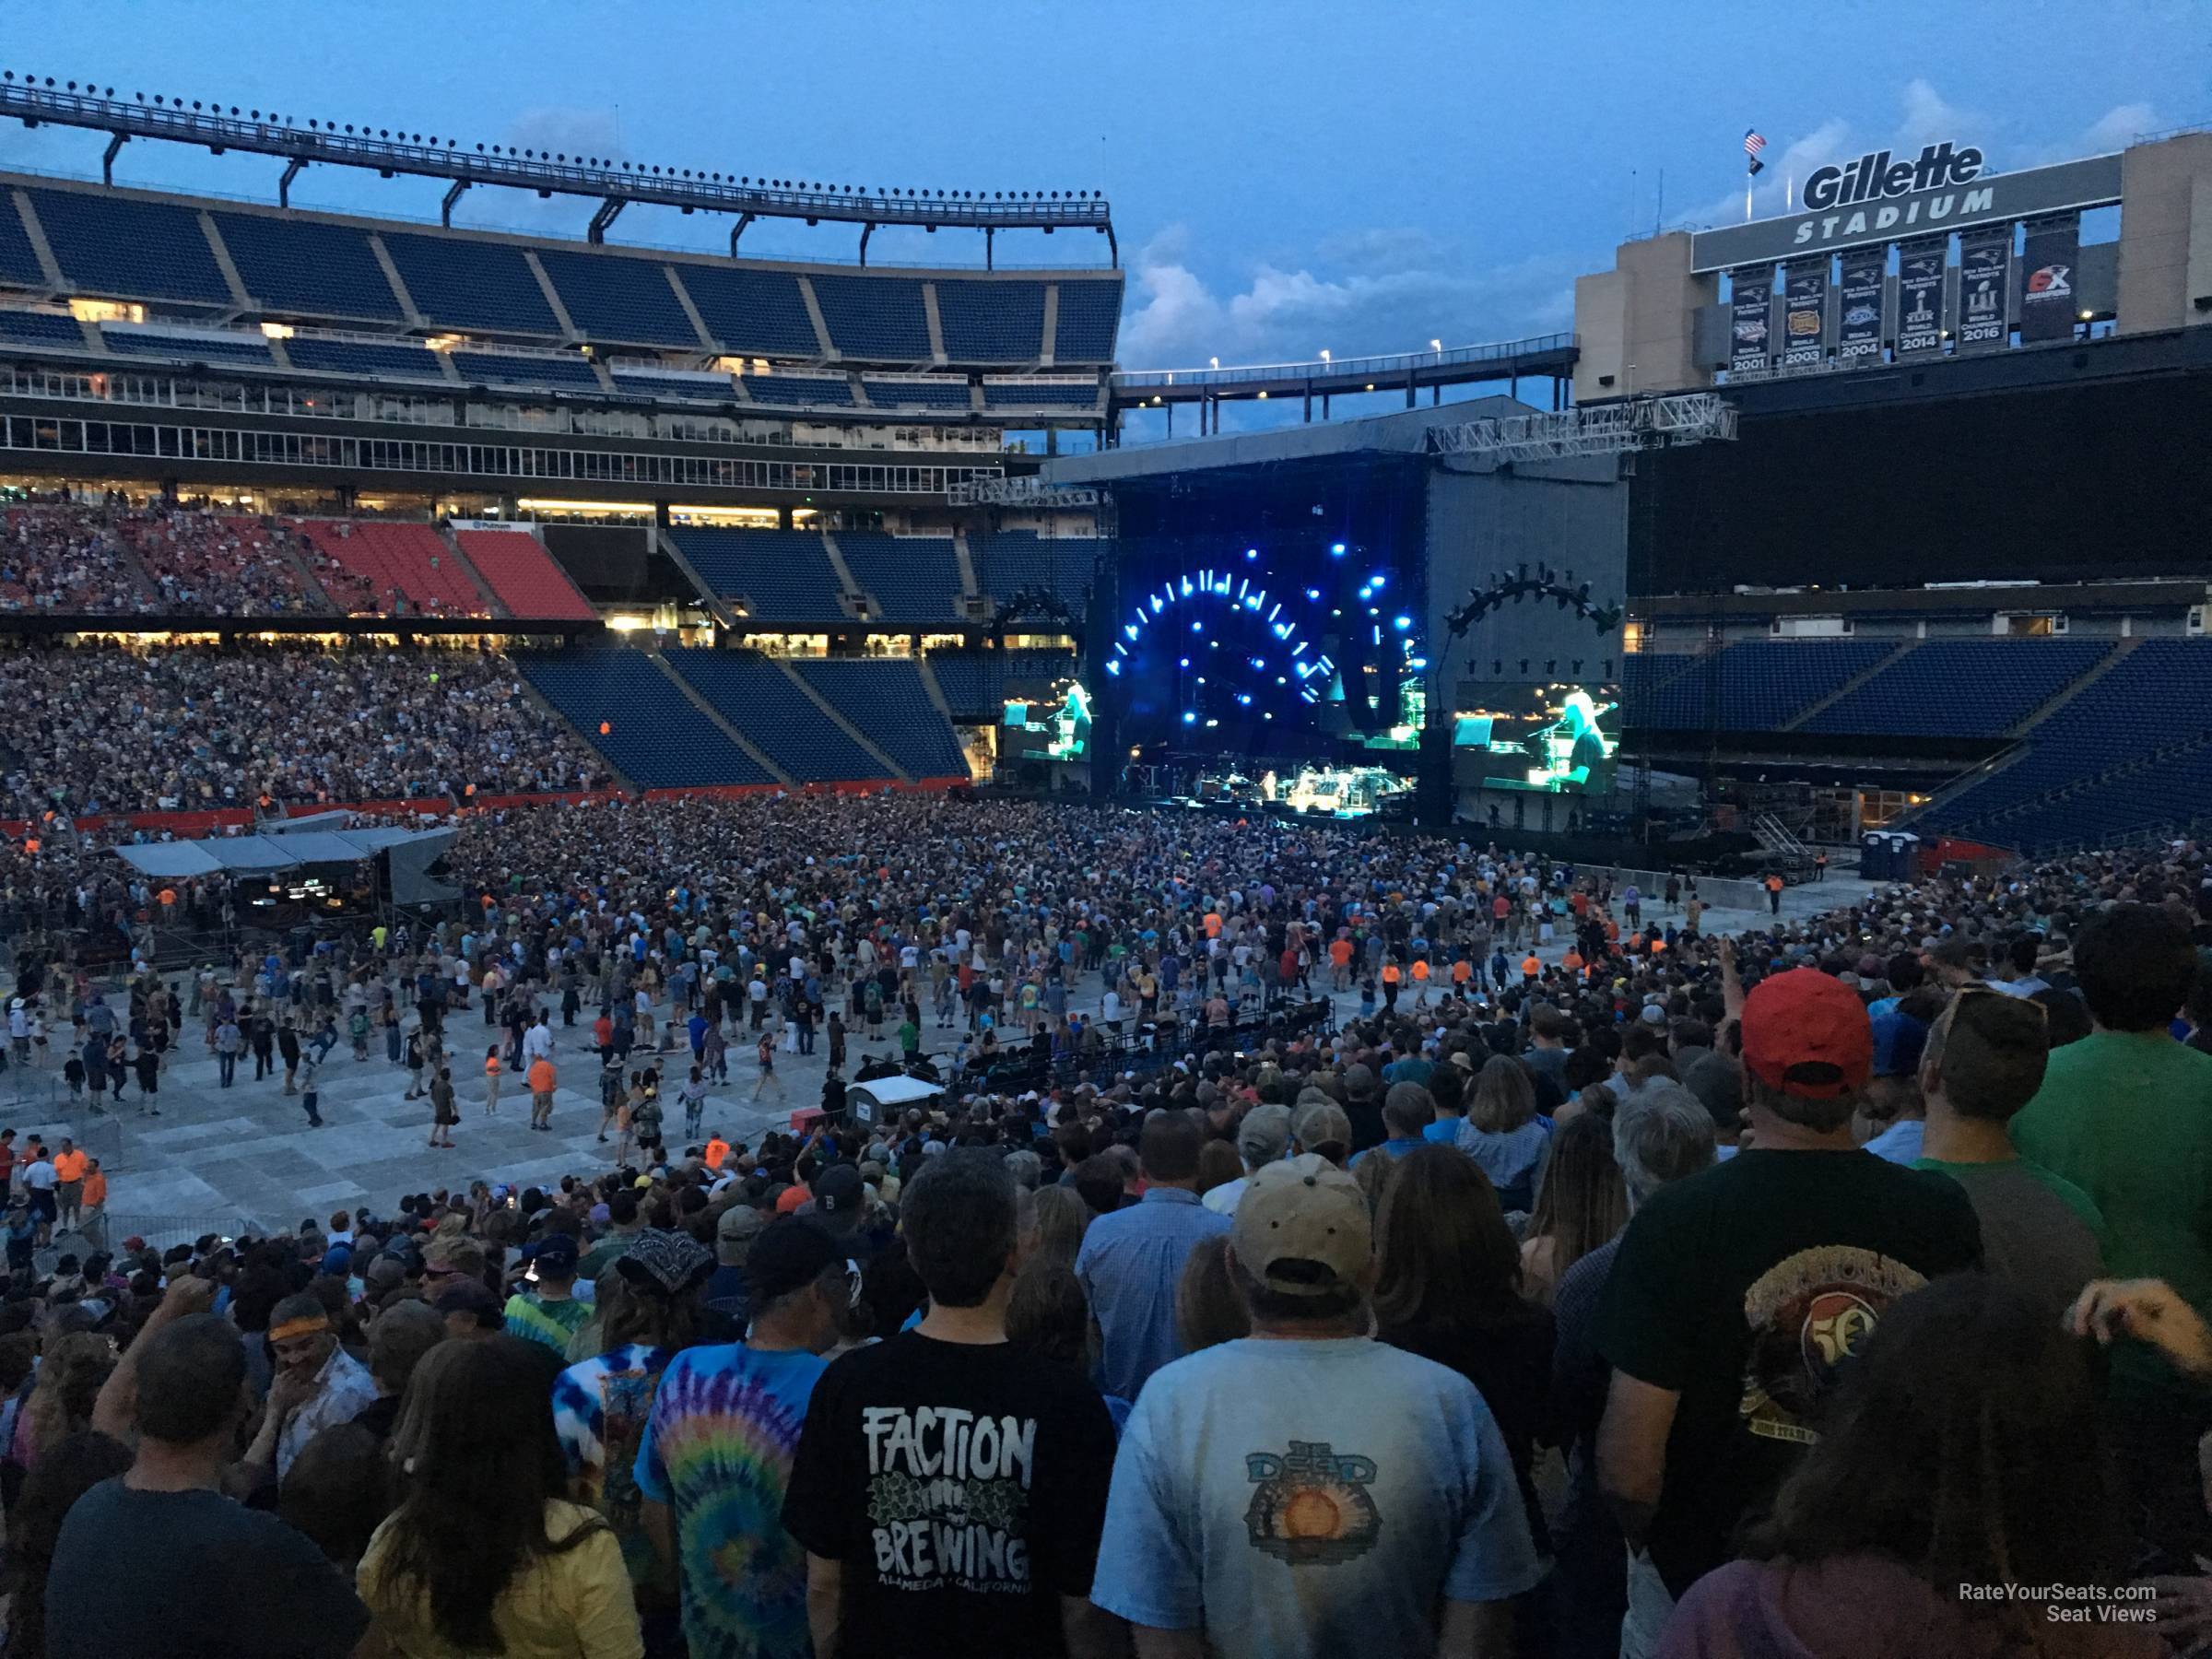 Section 133 at Gillette Stadium for Concerts